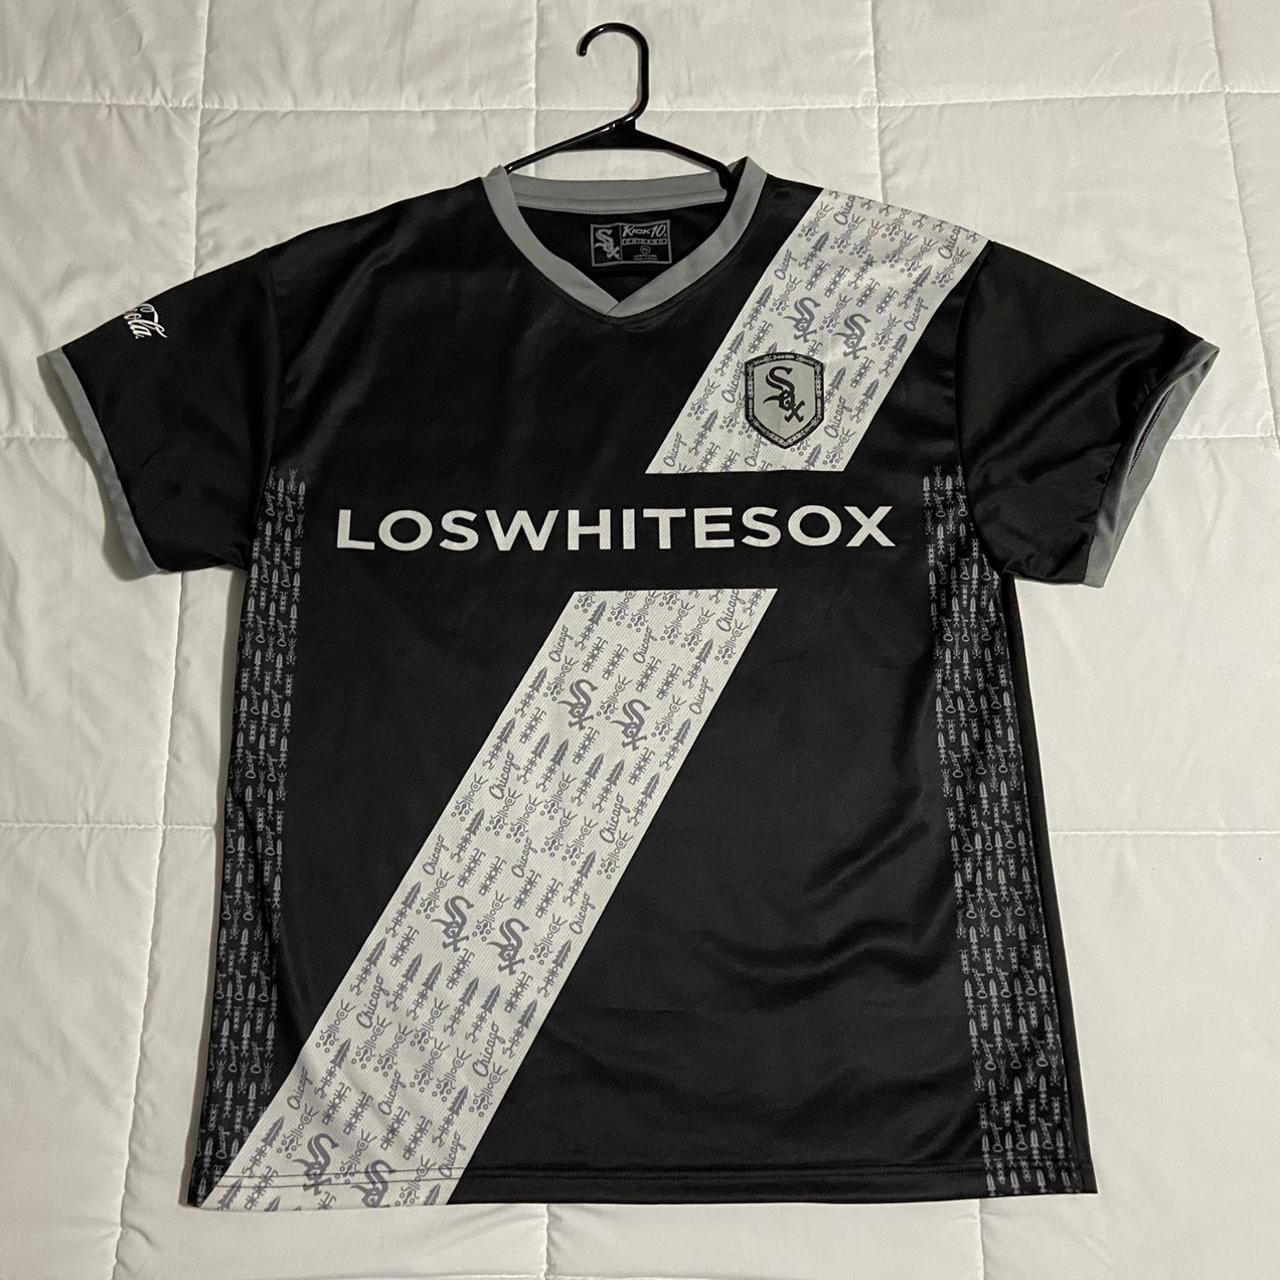 Chicago White Sox soccer jersey XL fits like a